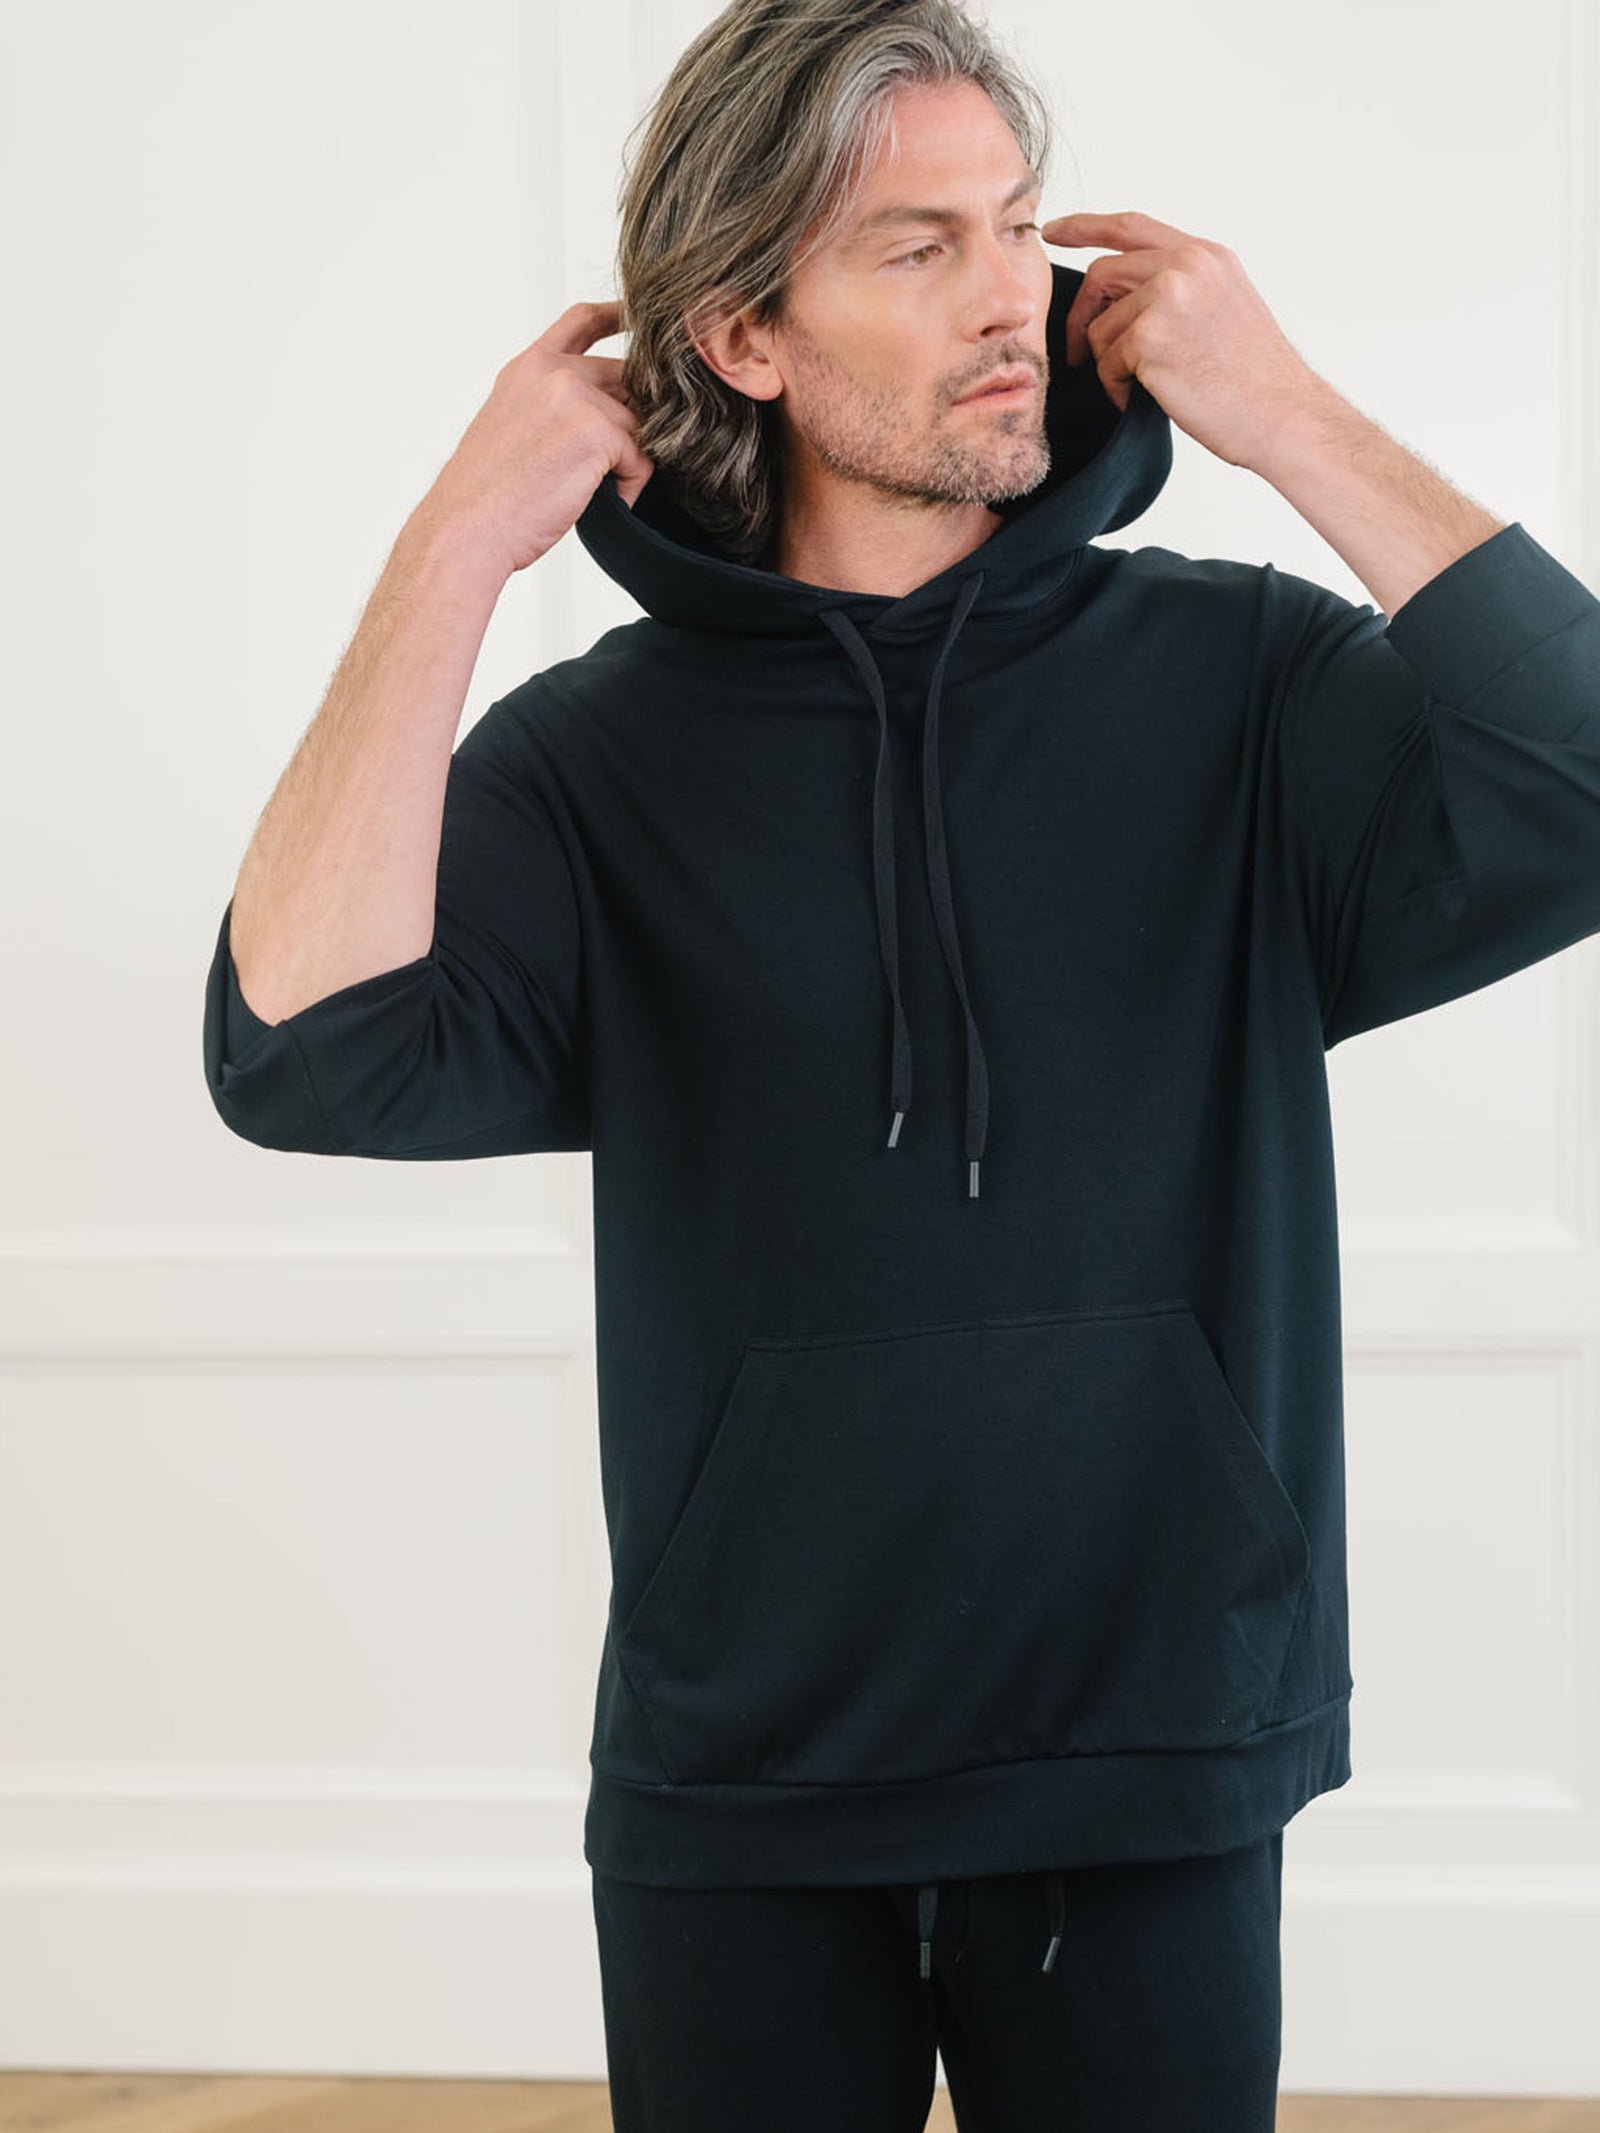 Black Bamboo Hoodie worn by man standing in front of white background.